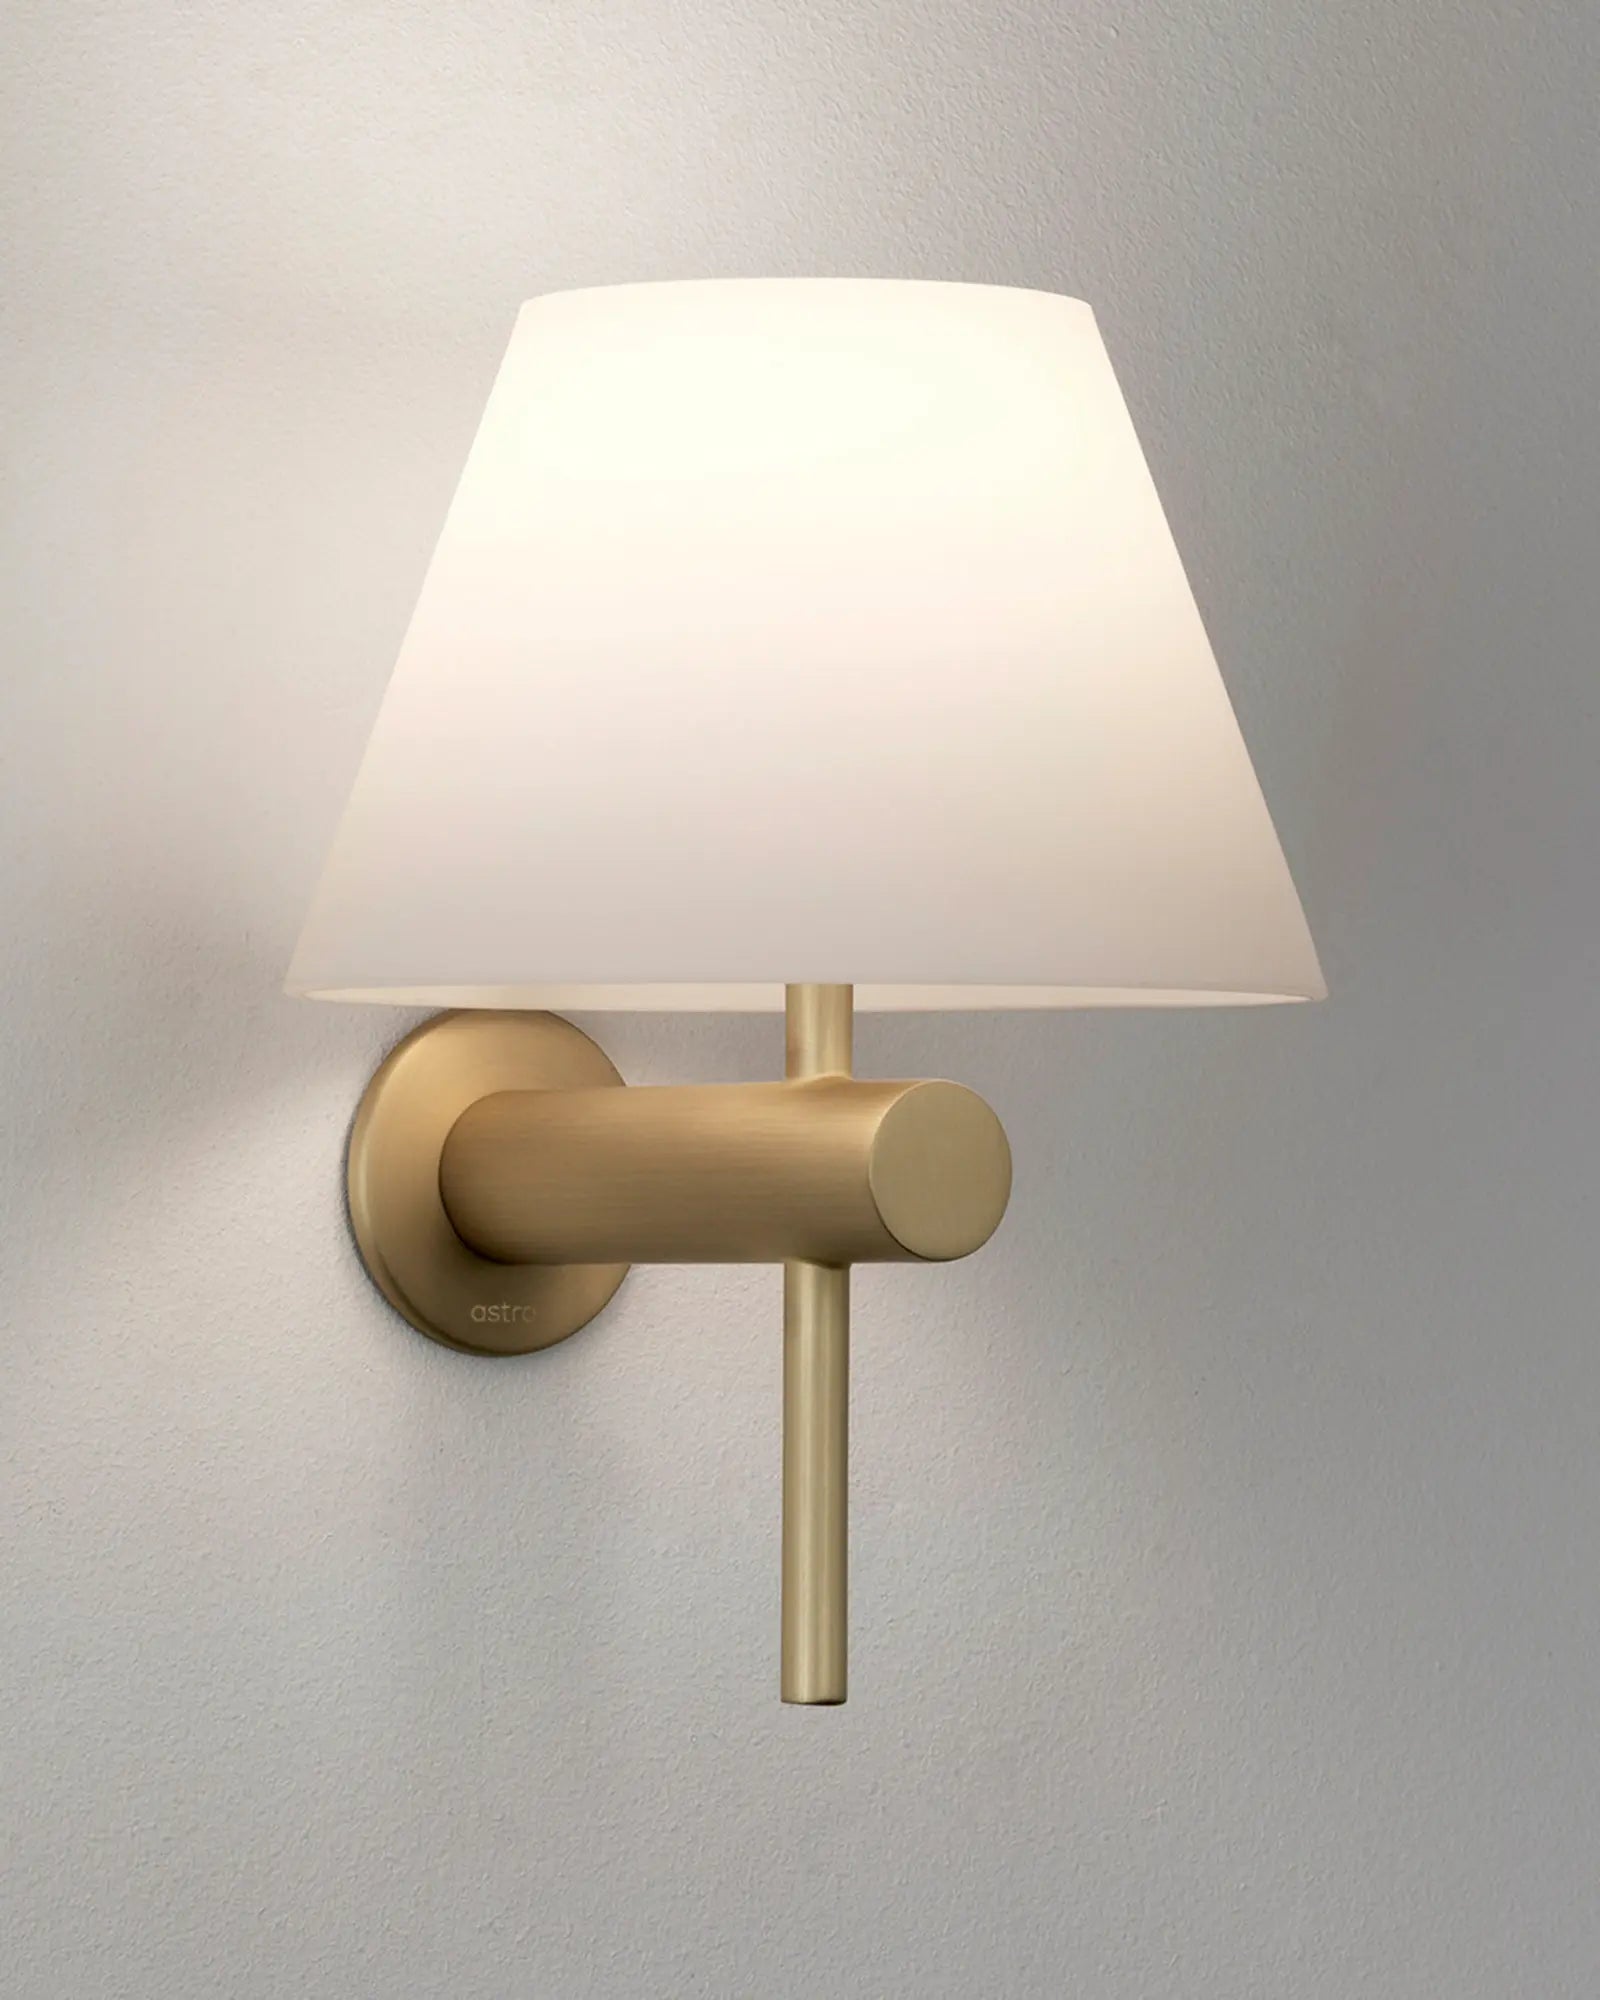 Roma Classic bathroom wall light with conic shade gpld